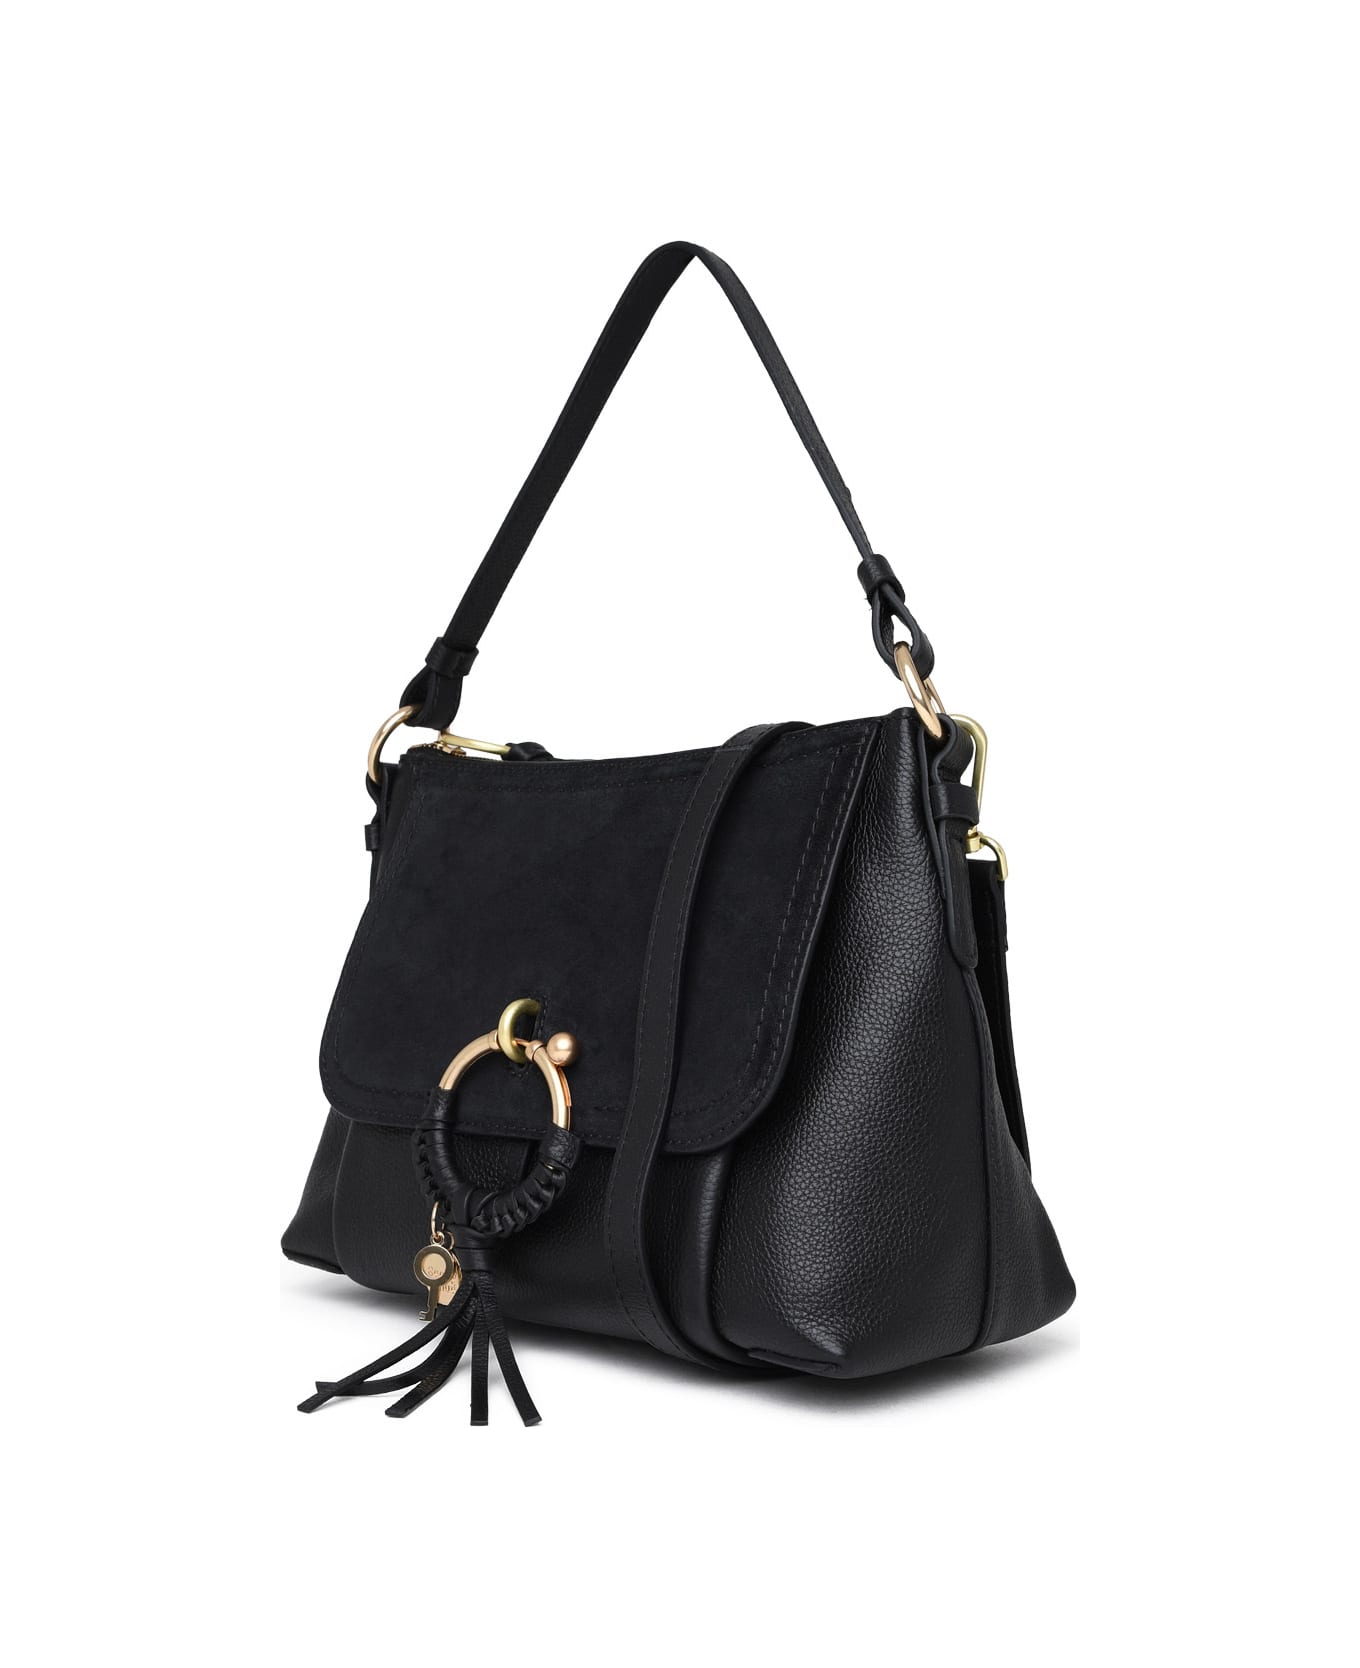 See by Chloé Black Leather Small Joan Bag - Black トートバッグ